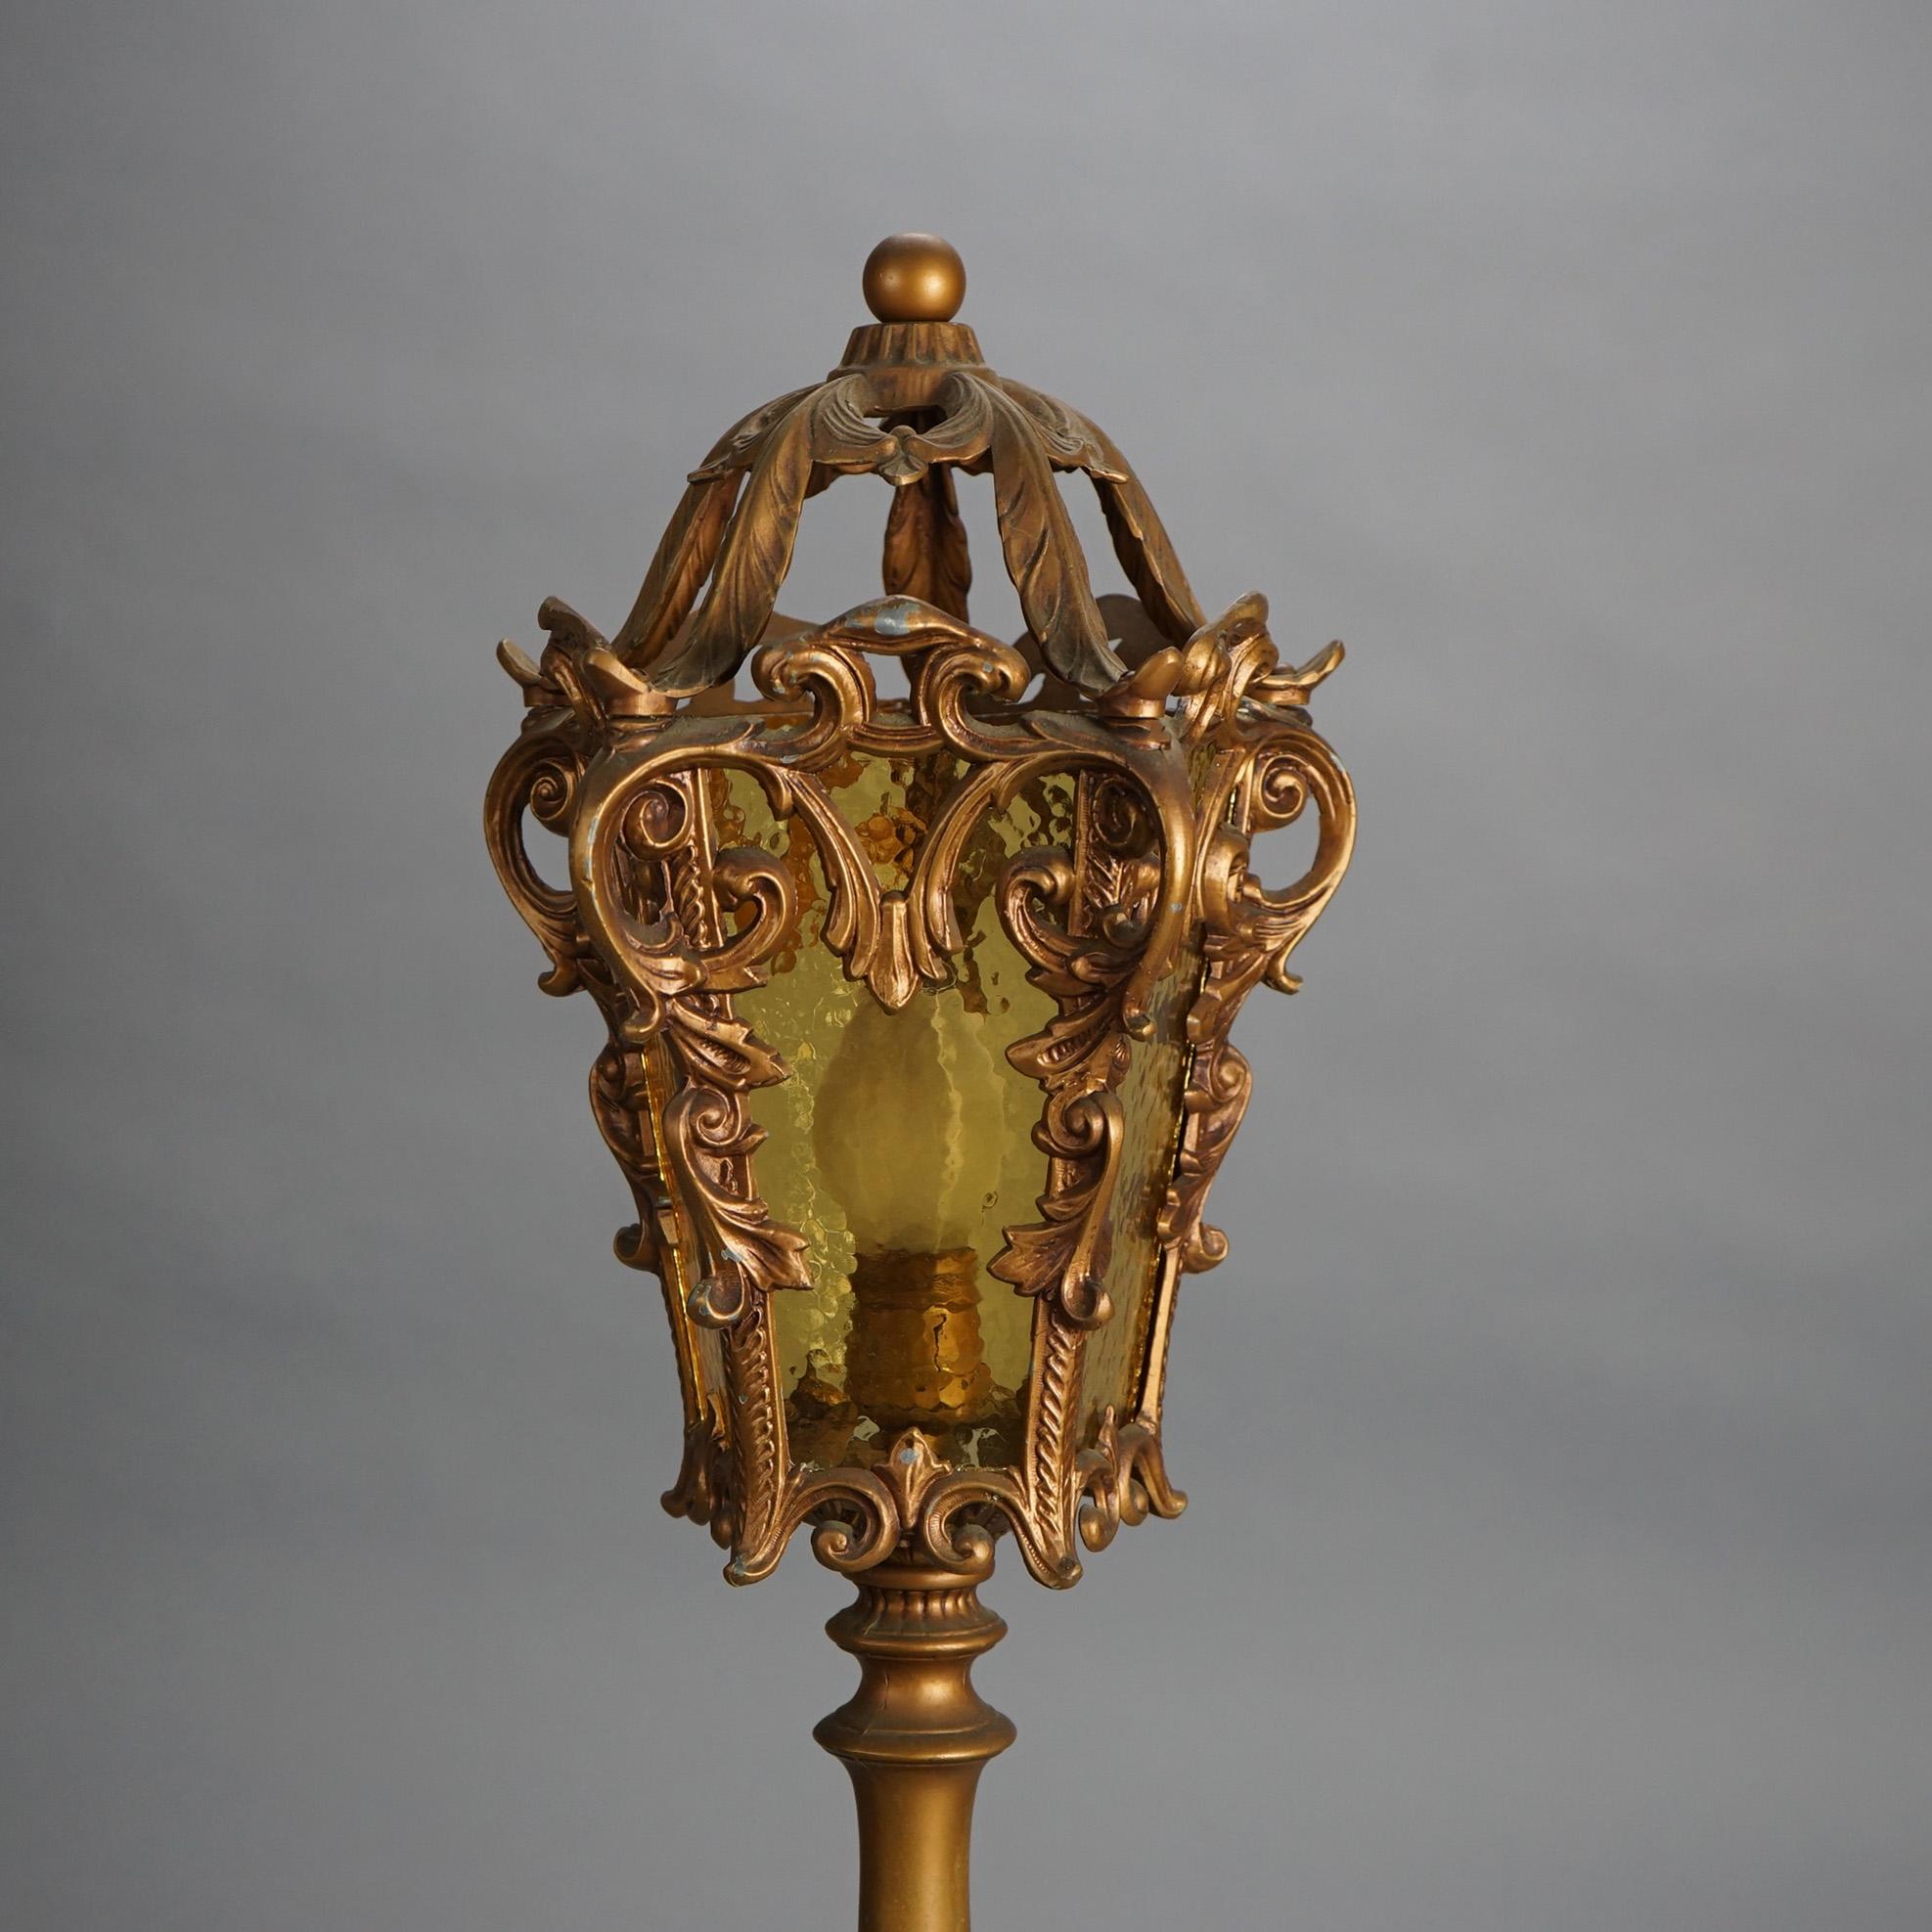 American Antique Arts & Crafts Hammered Amber Glass Torchiere Table Lamp c1920 For Sale